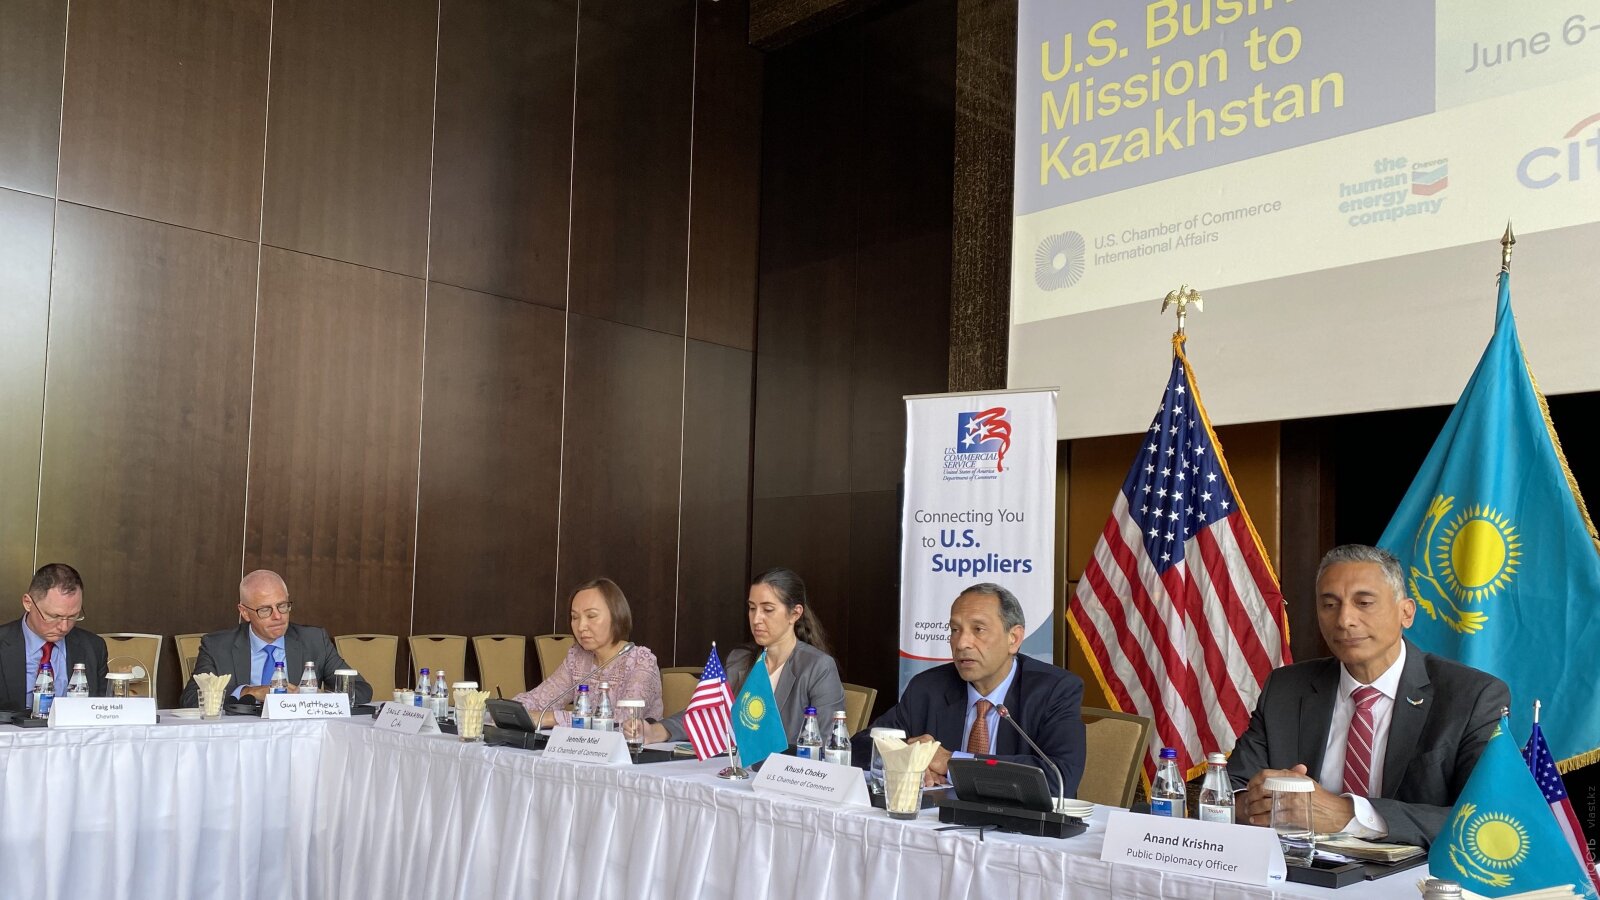 US Businesses See “Enormous Potential” in Kazakhstan